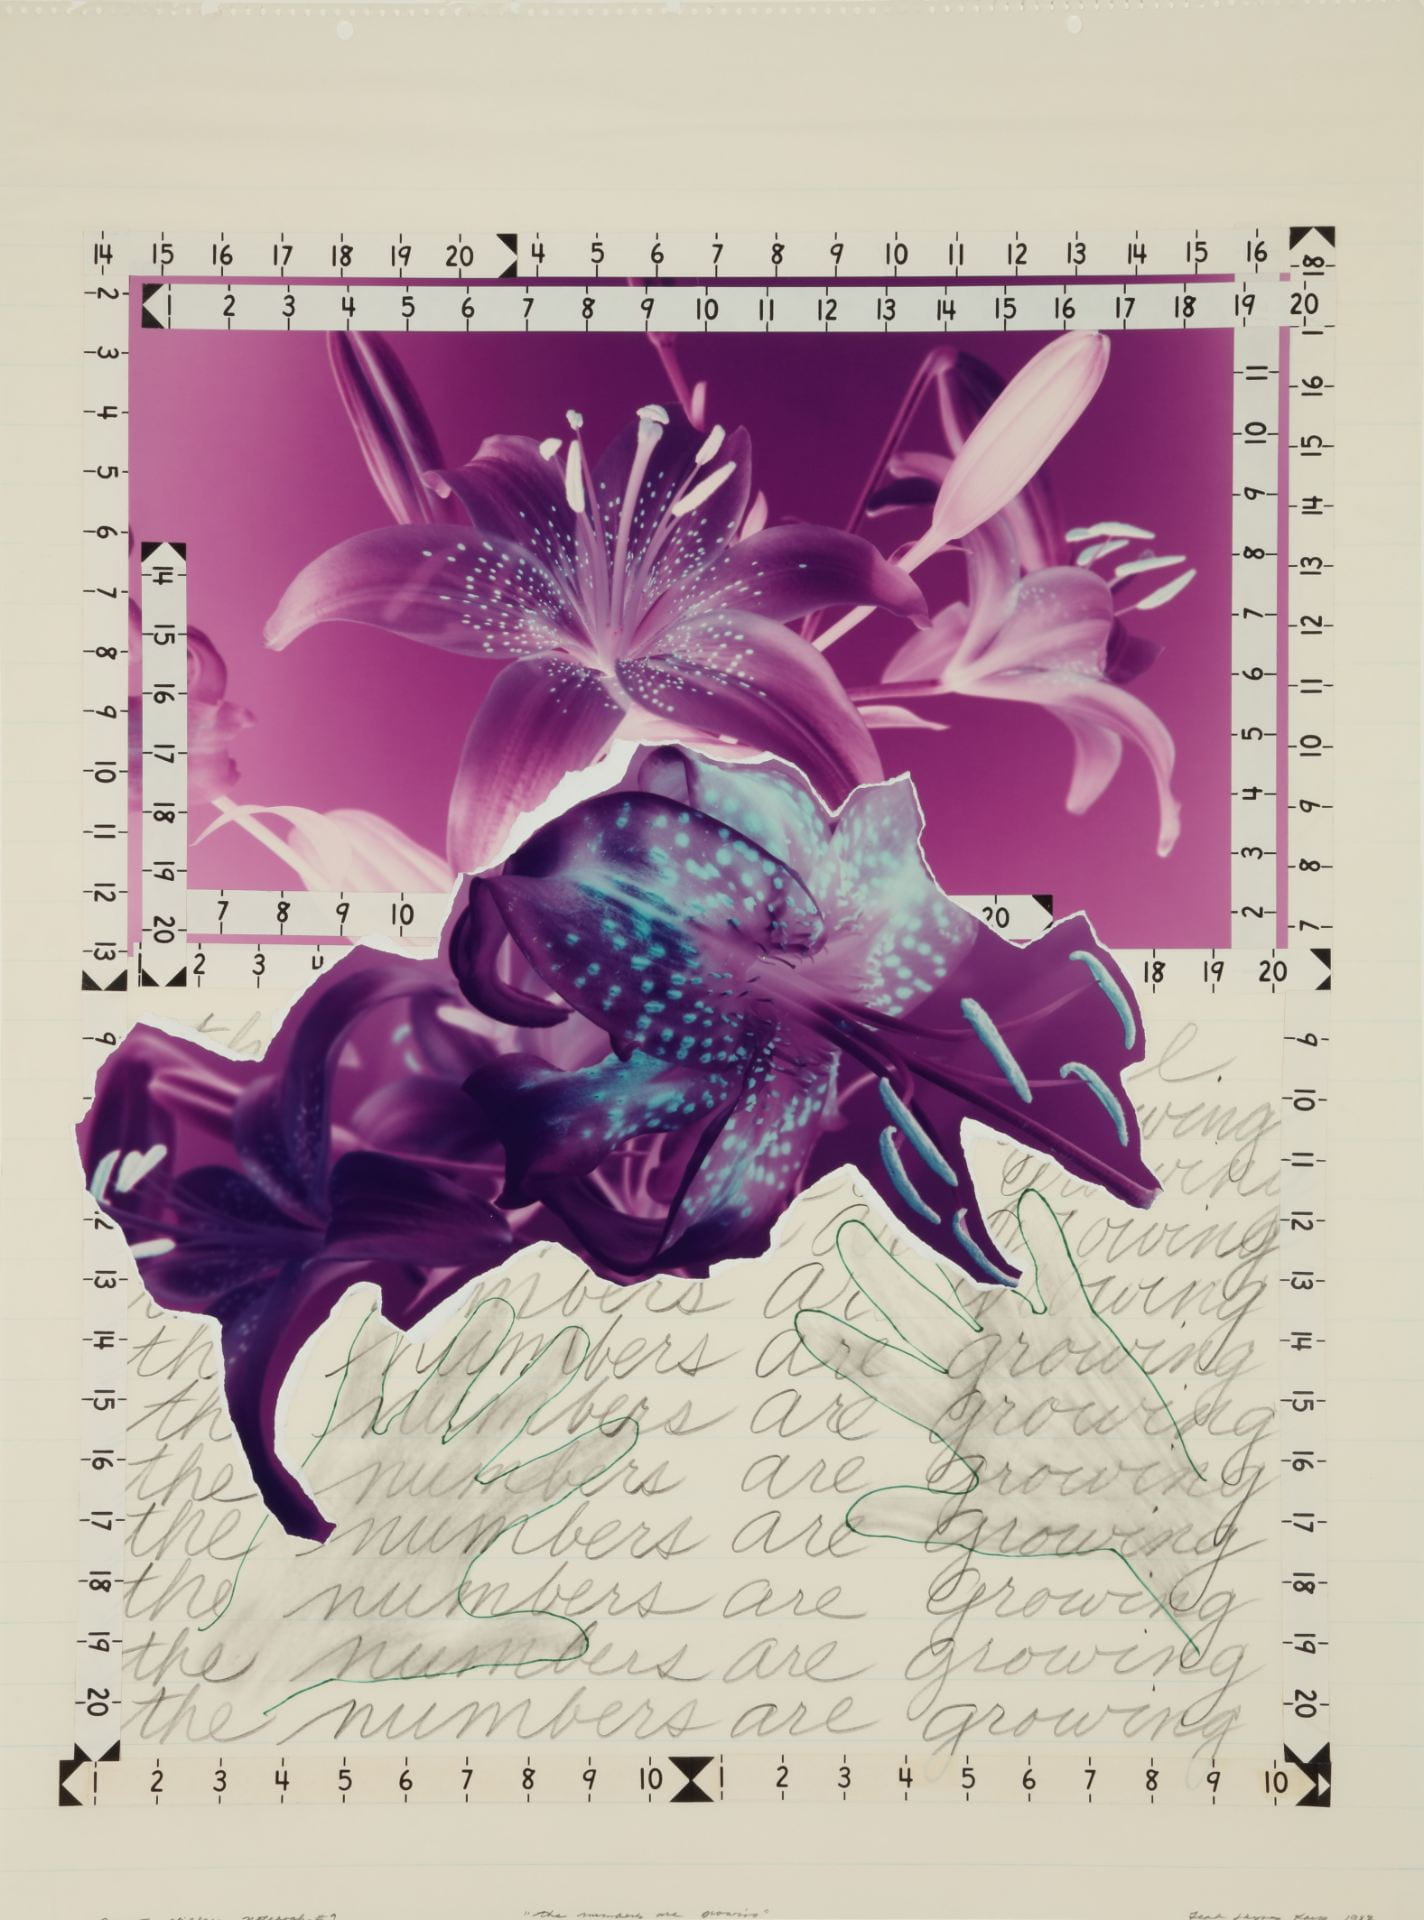 A collage of purple and blue flowers, numbers and measuring tape indents arranged on notepad paper. 'The numbers are growing' is handwritten in cursive multiple times across the lower third of the artwork.